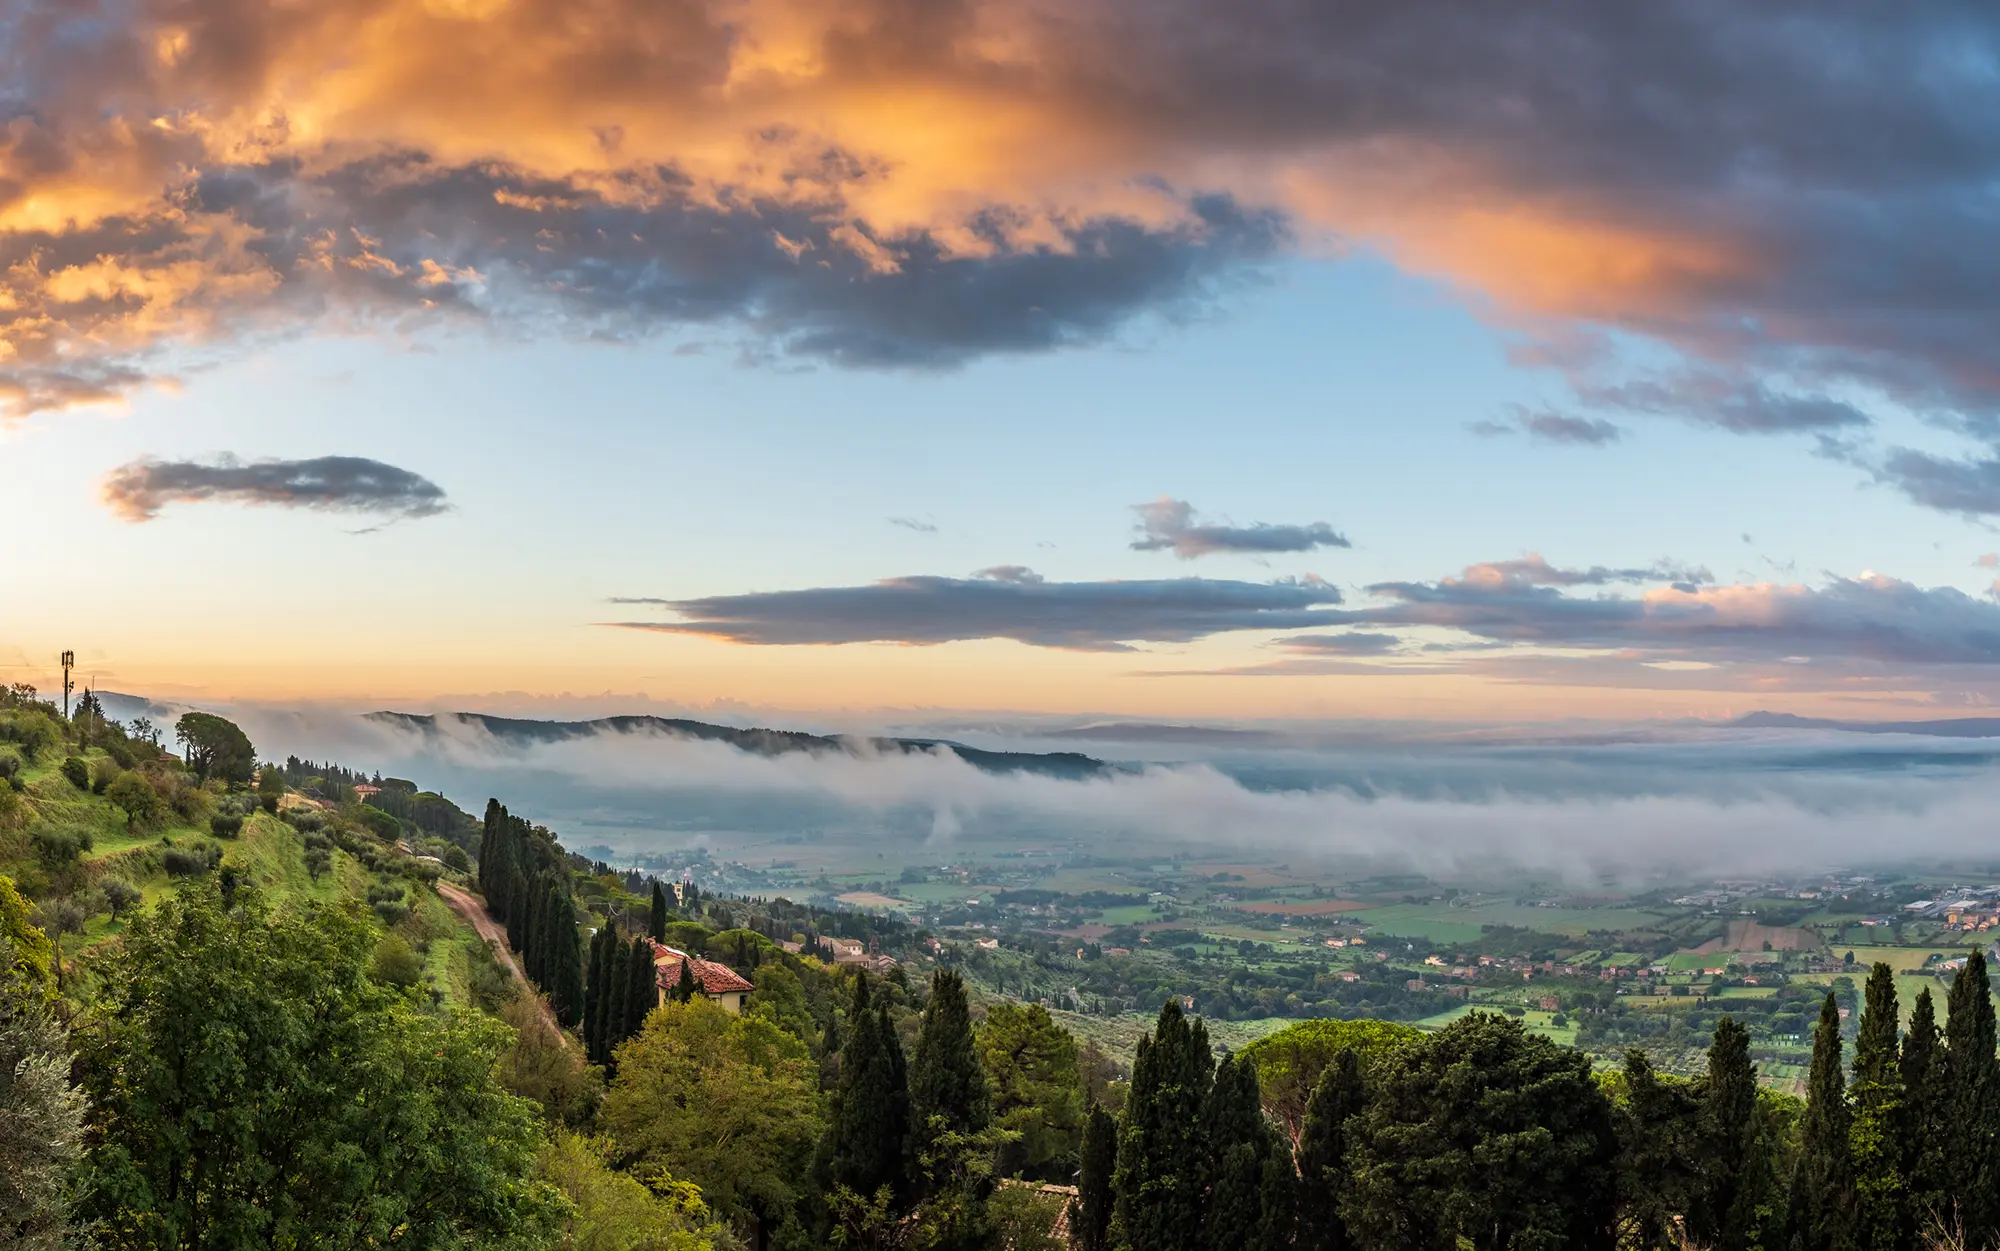 Sunrise over the Chiana Valley, as seen from Cortona on September 27, 2022.